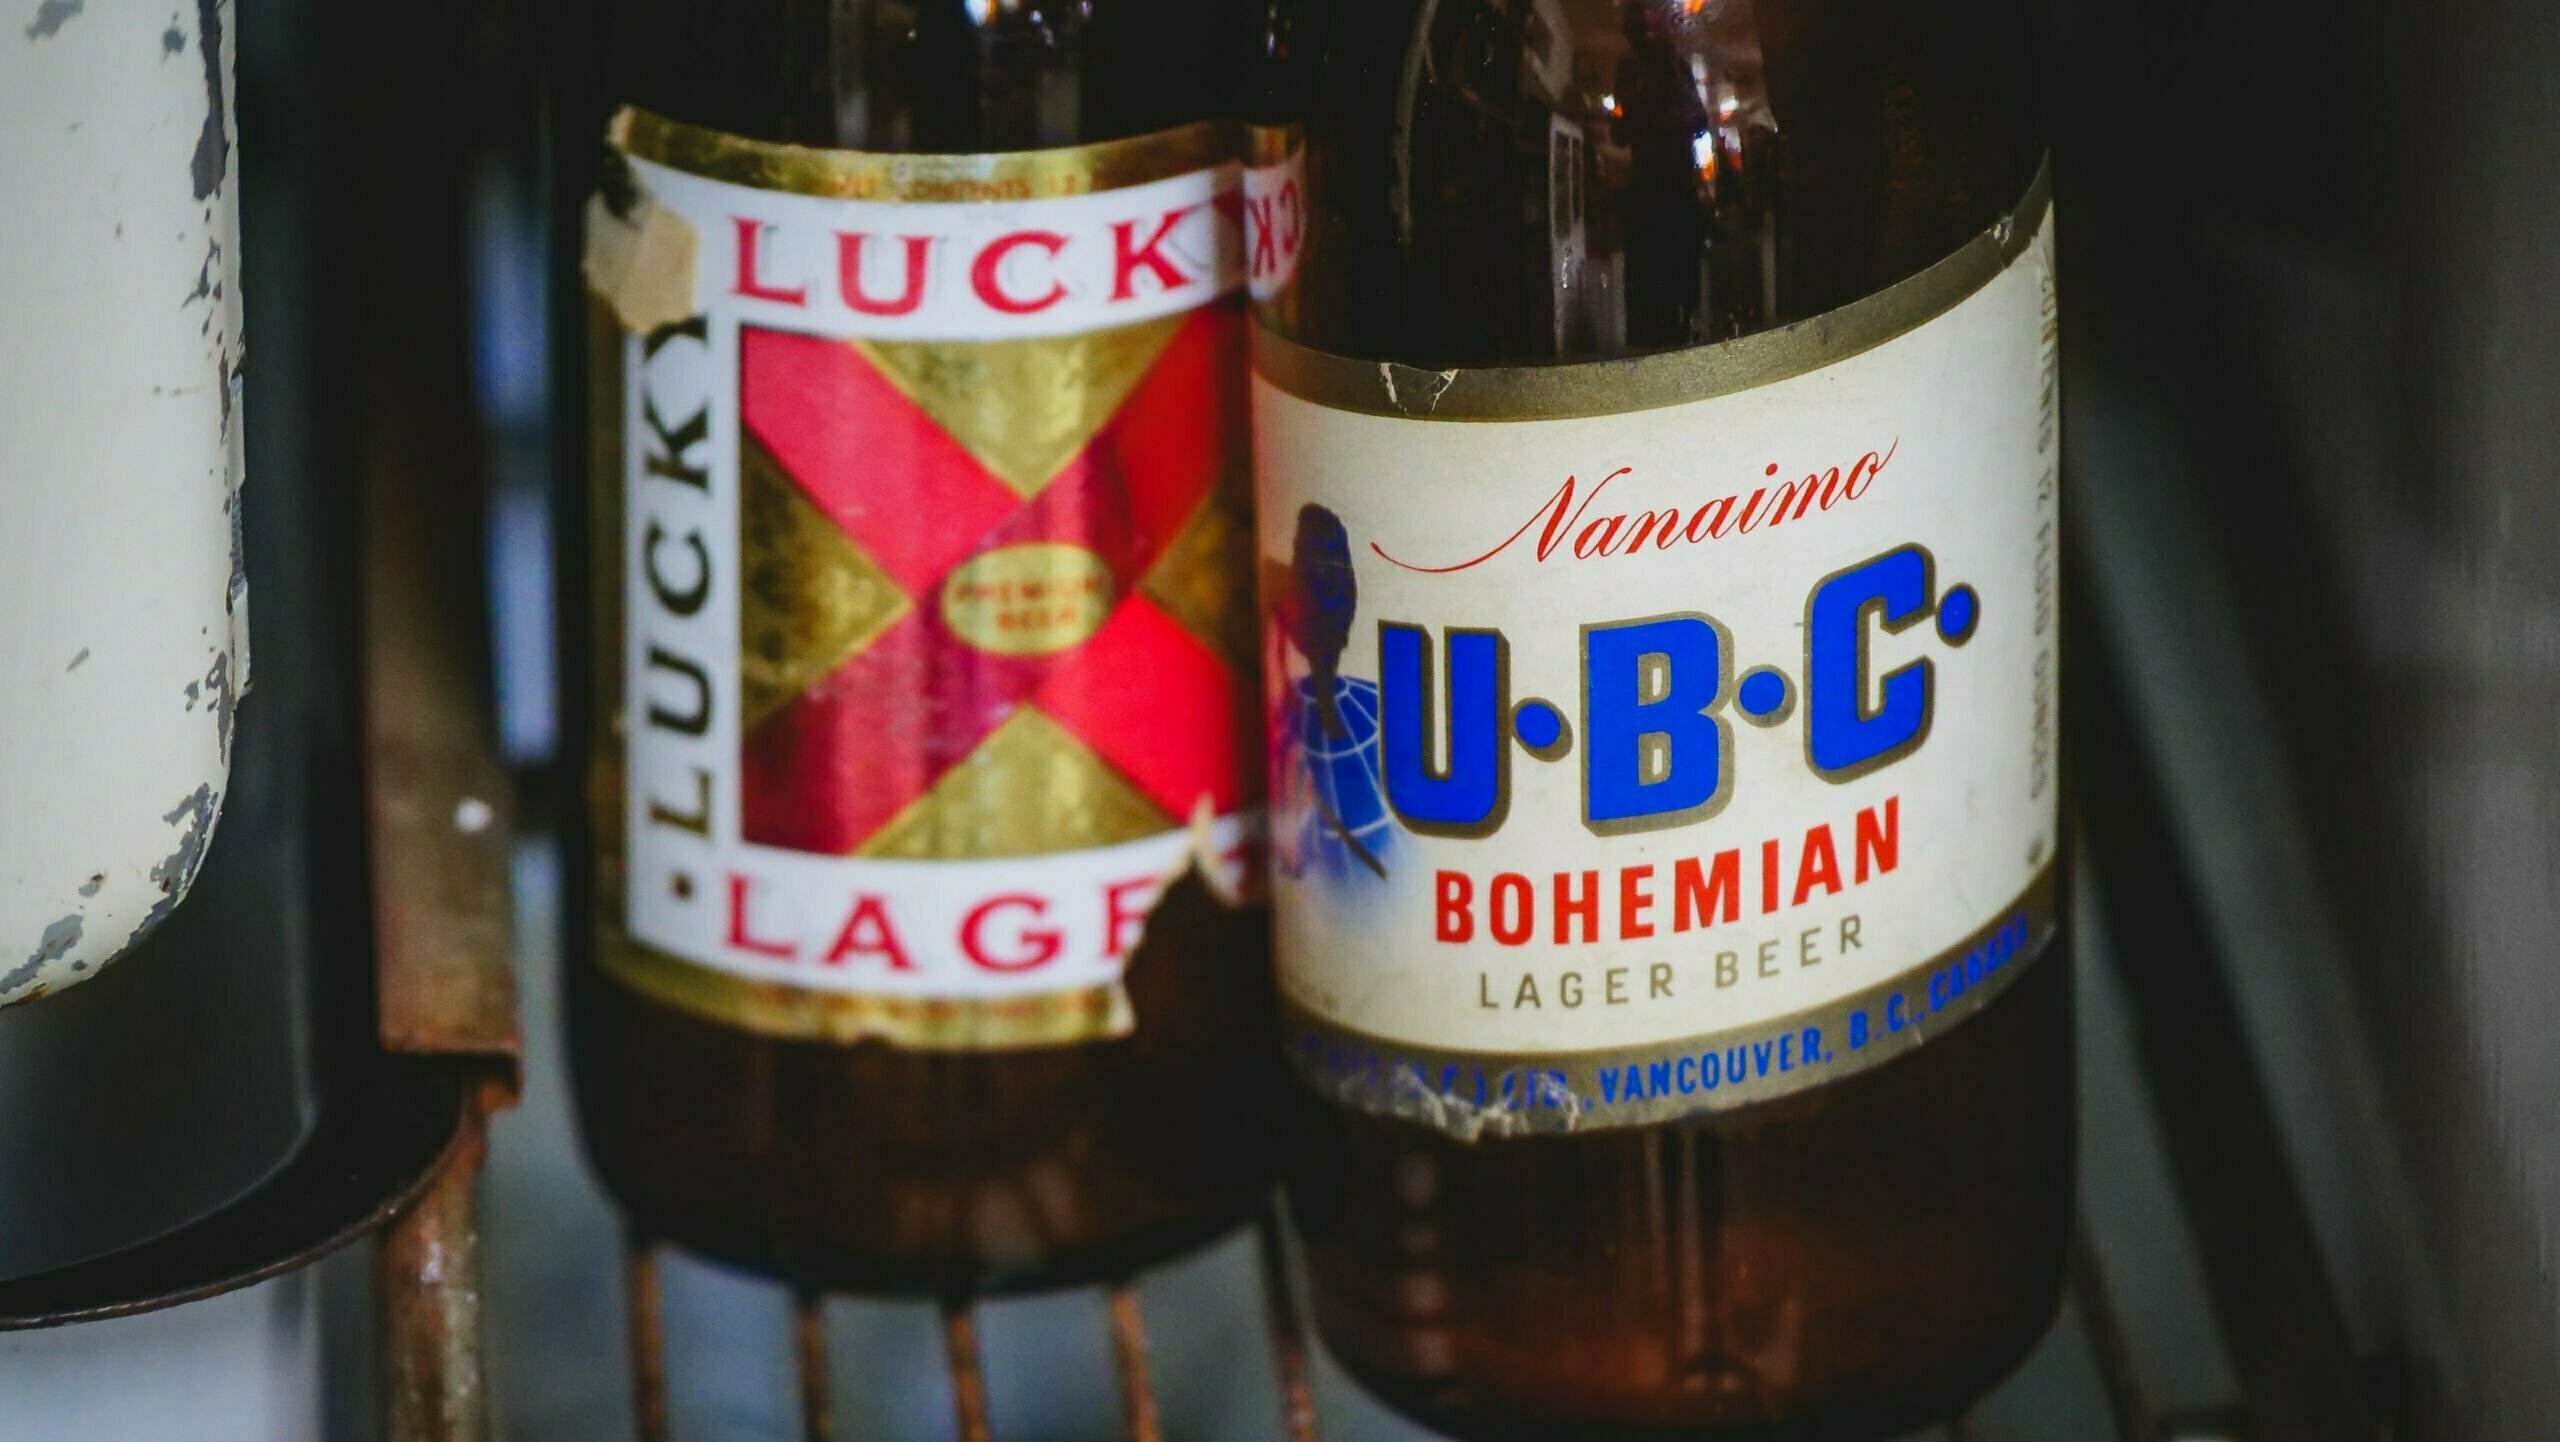 Beer you can try in Sointula include Lucky Lager and Nanaimo UBC Bohemian Lager 